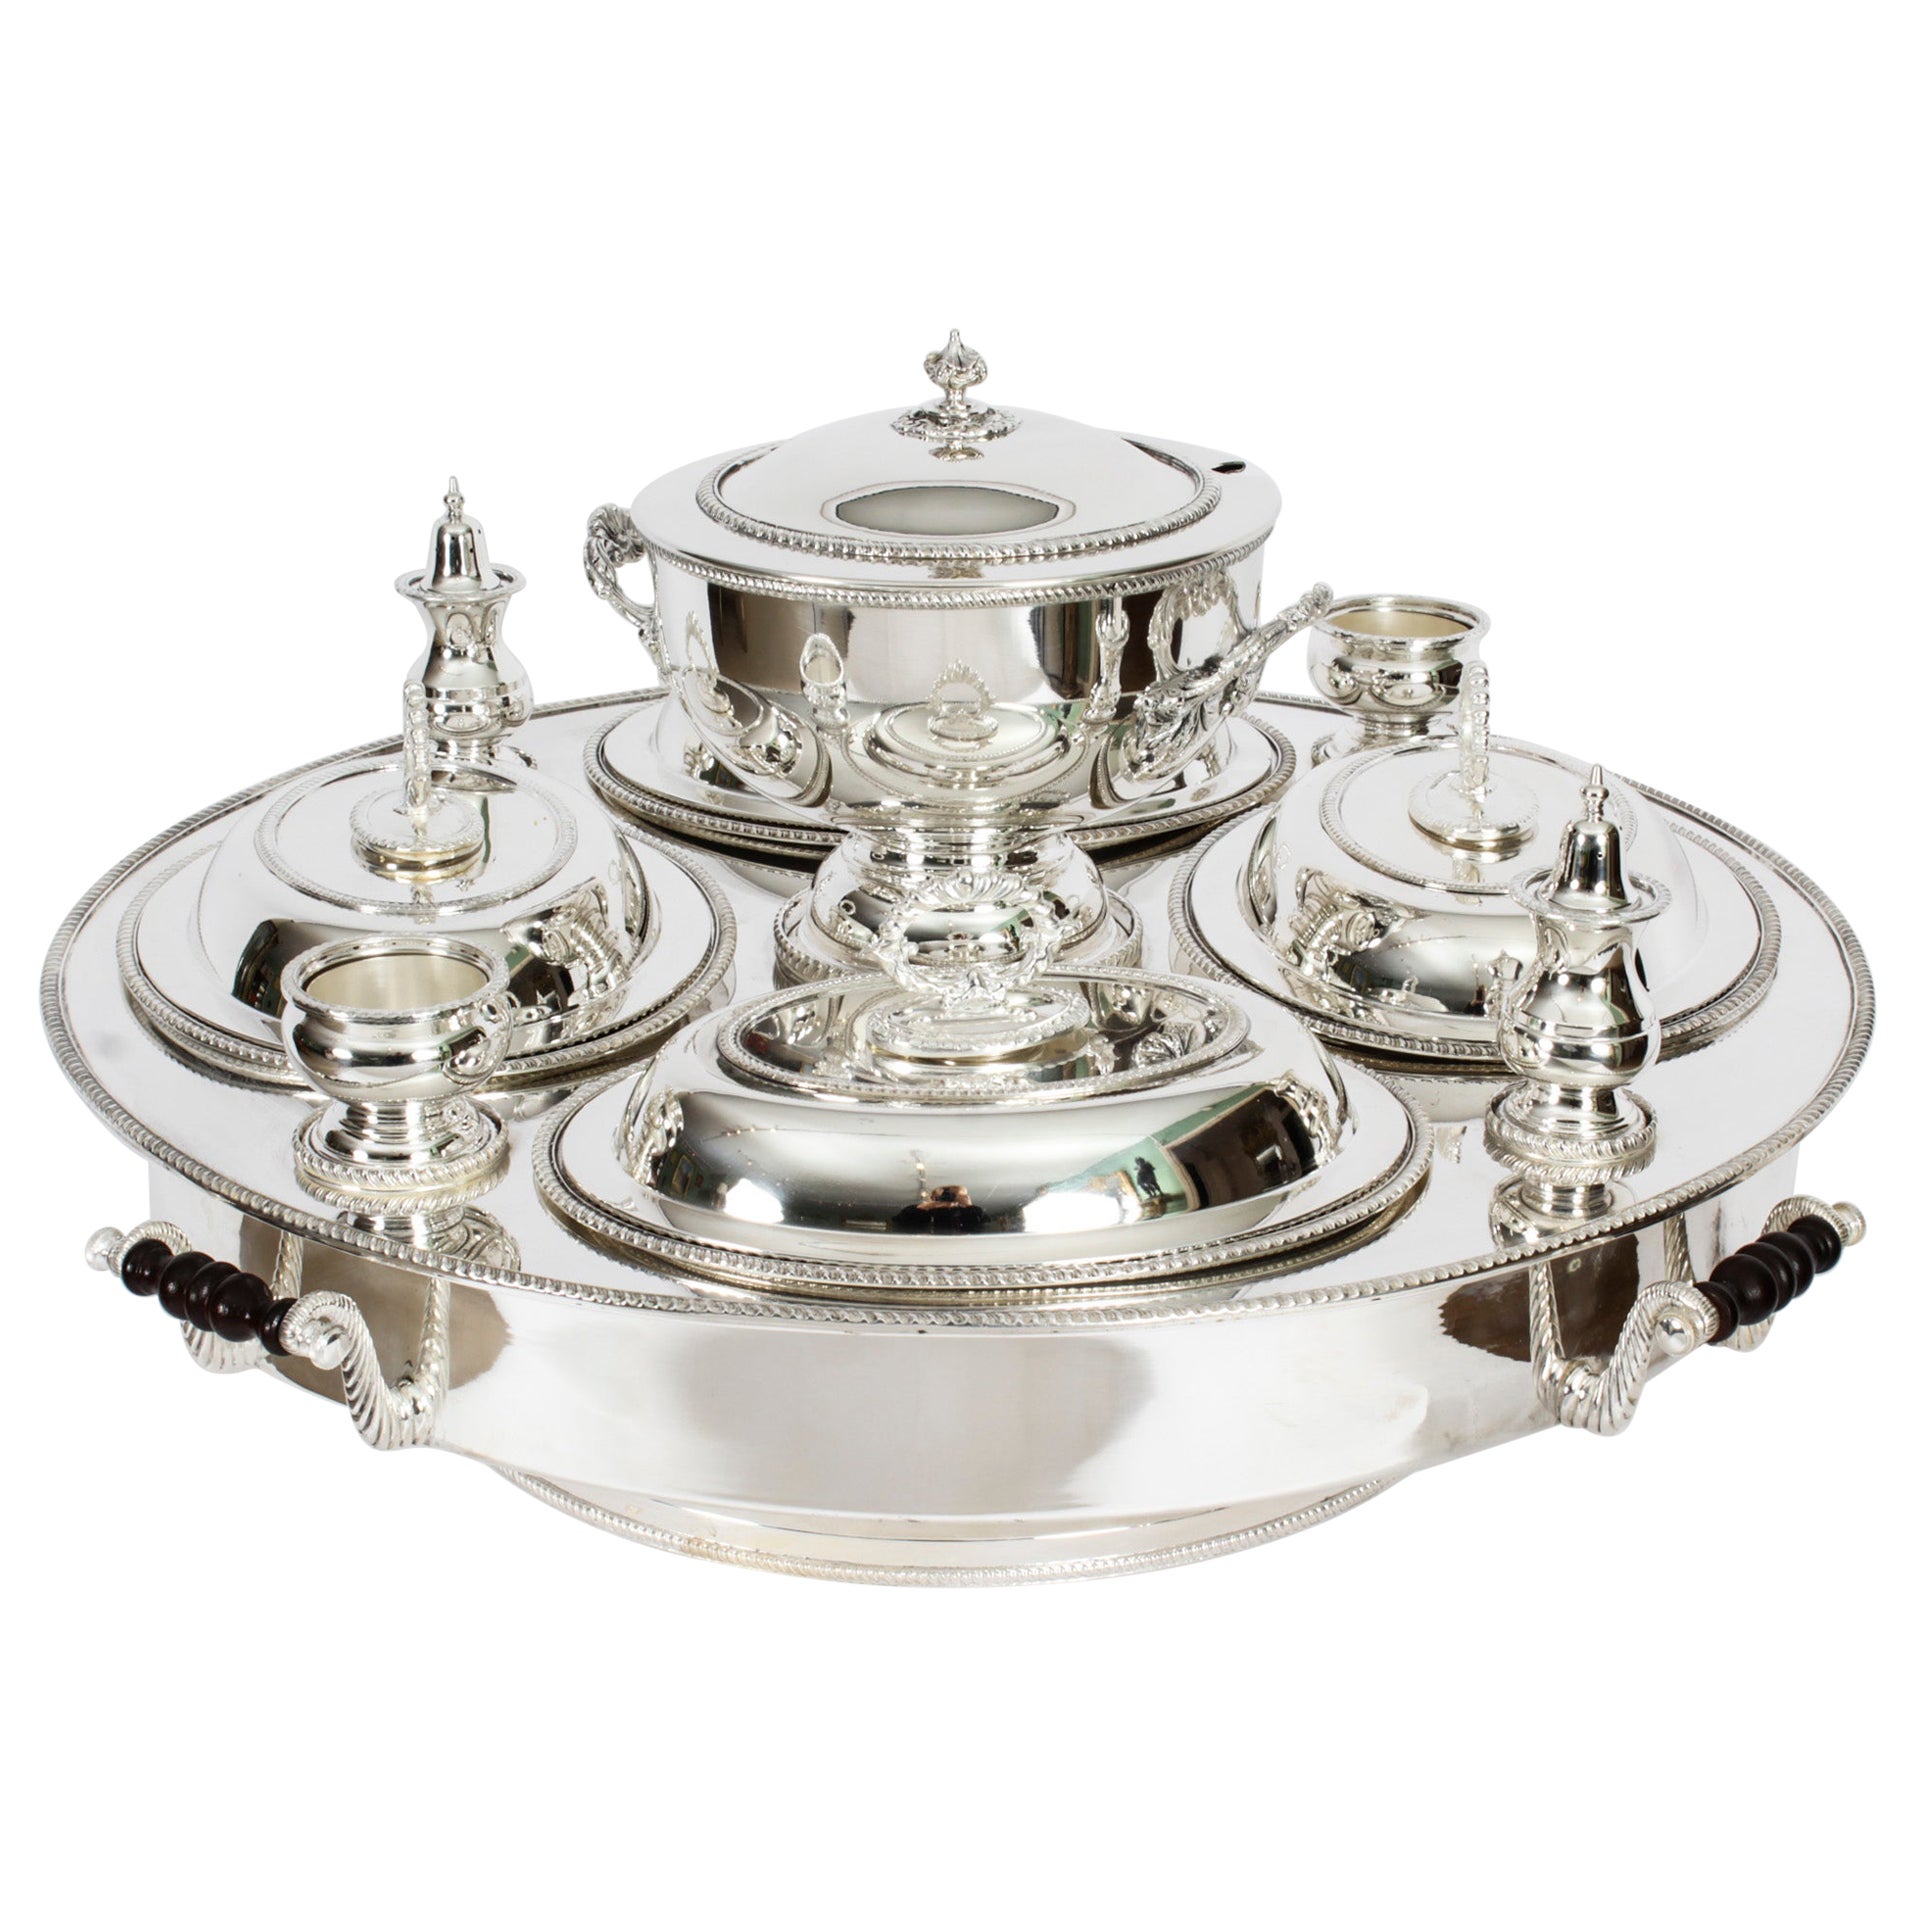 SILVER Plated Lazy Susan-Plain Style con gadroon Edge 